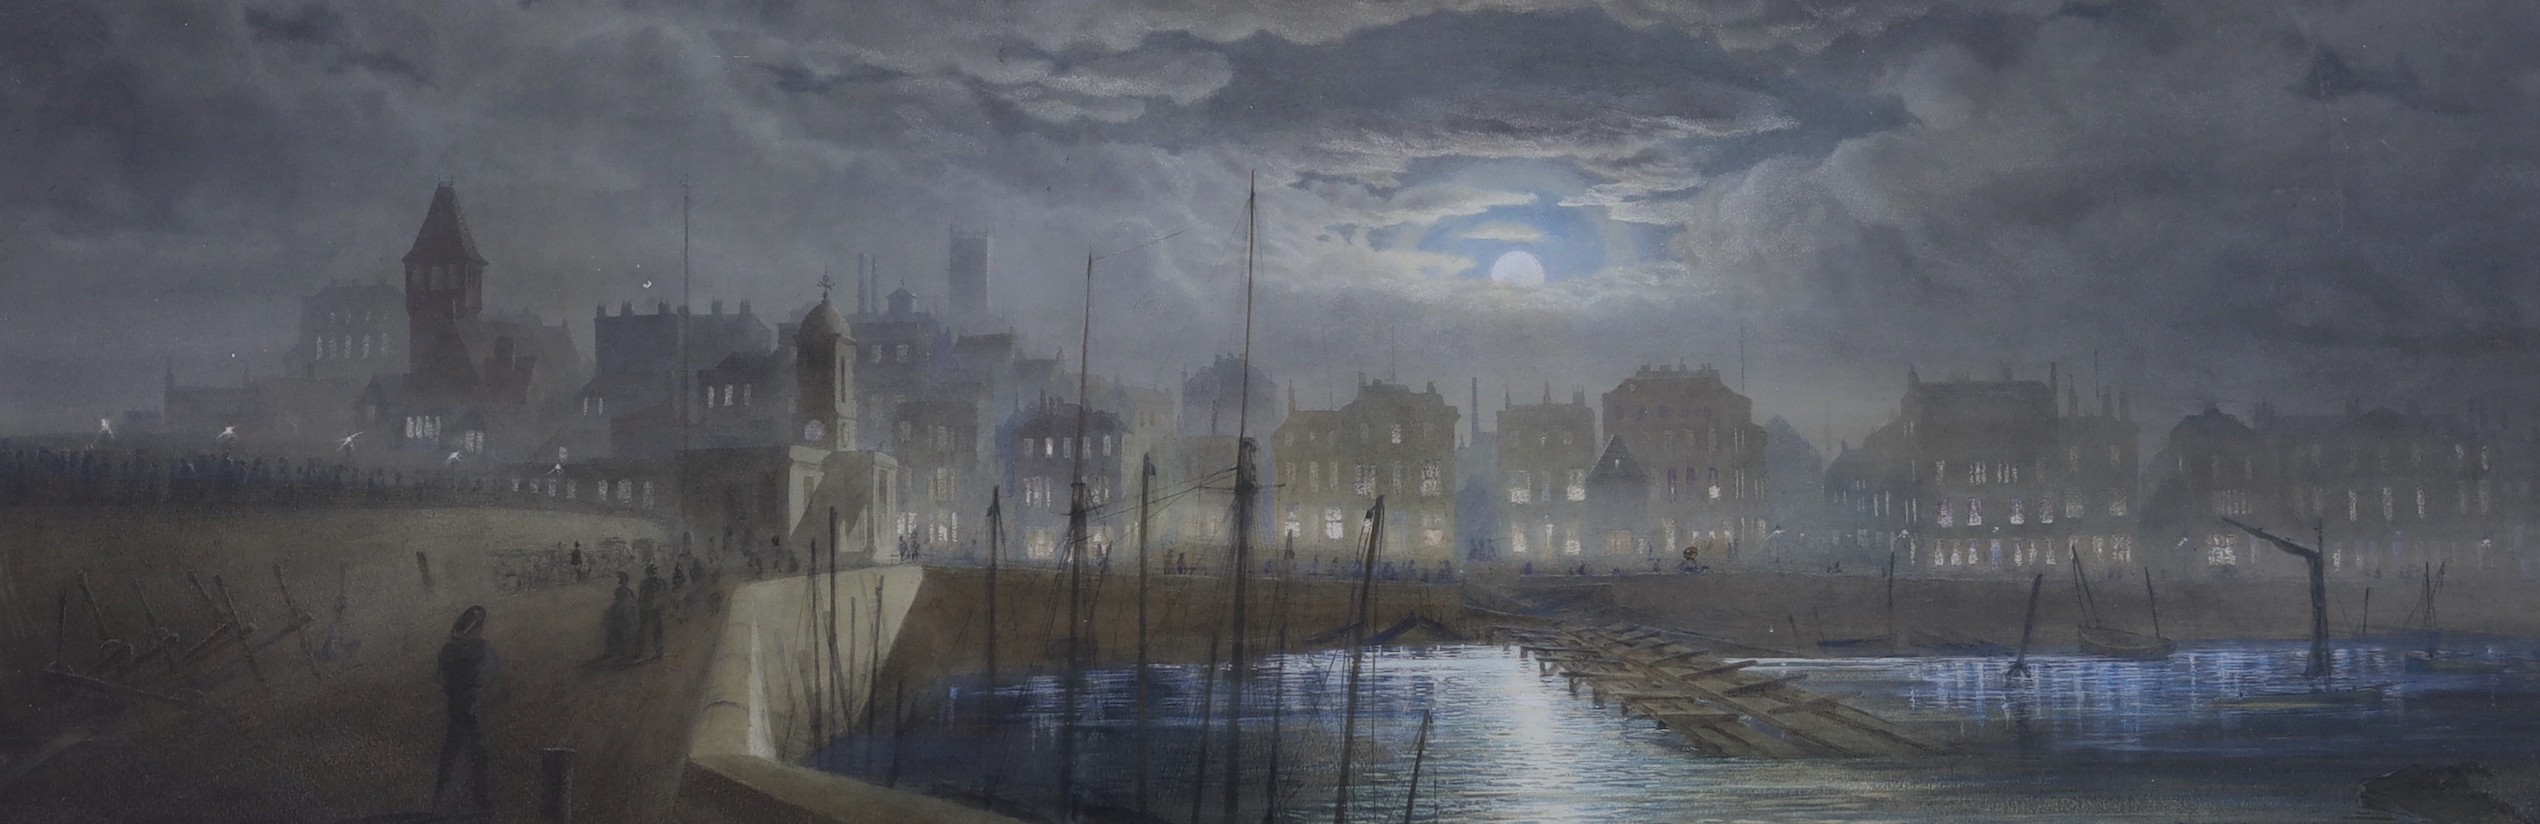 Elizabeth Arkwright, 19th century, gouache, Scarborough, A night time scene, provenance and gallery label verso, 26 x 79cm